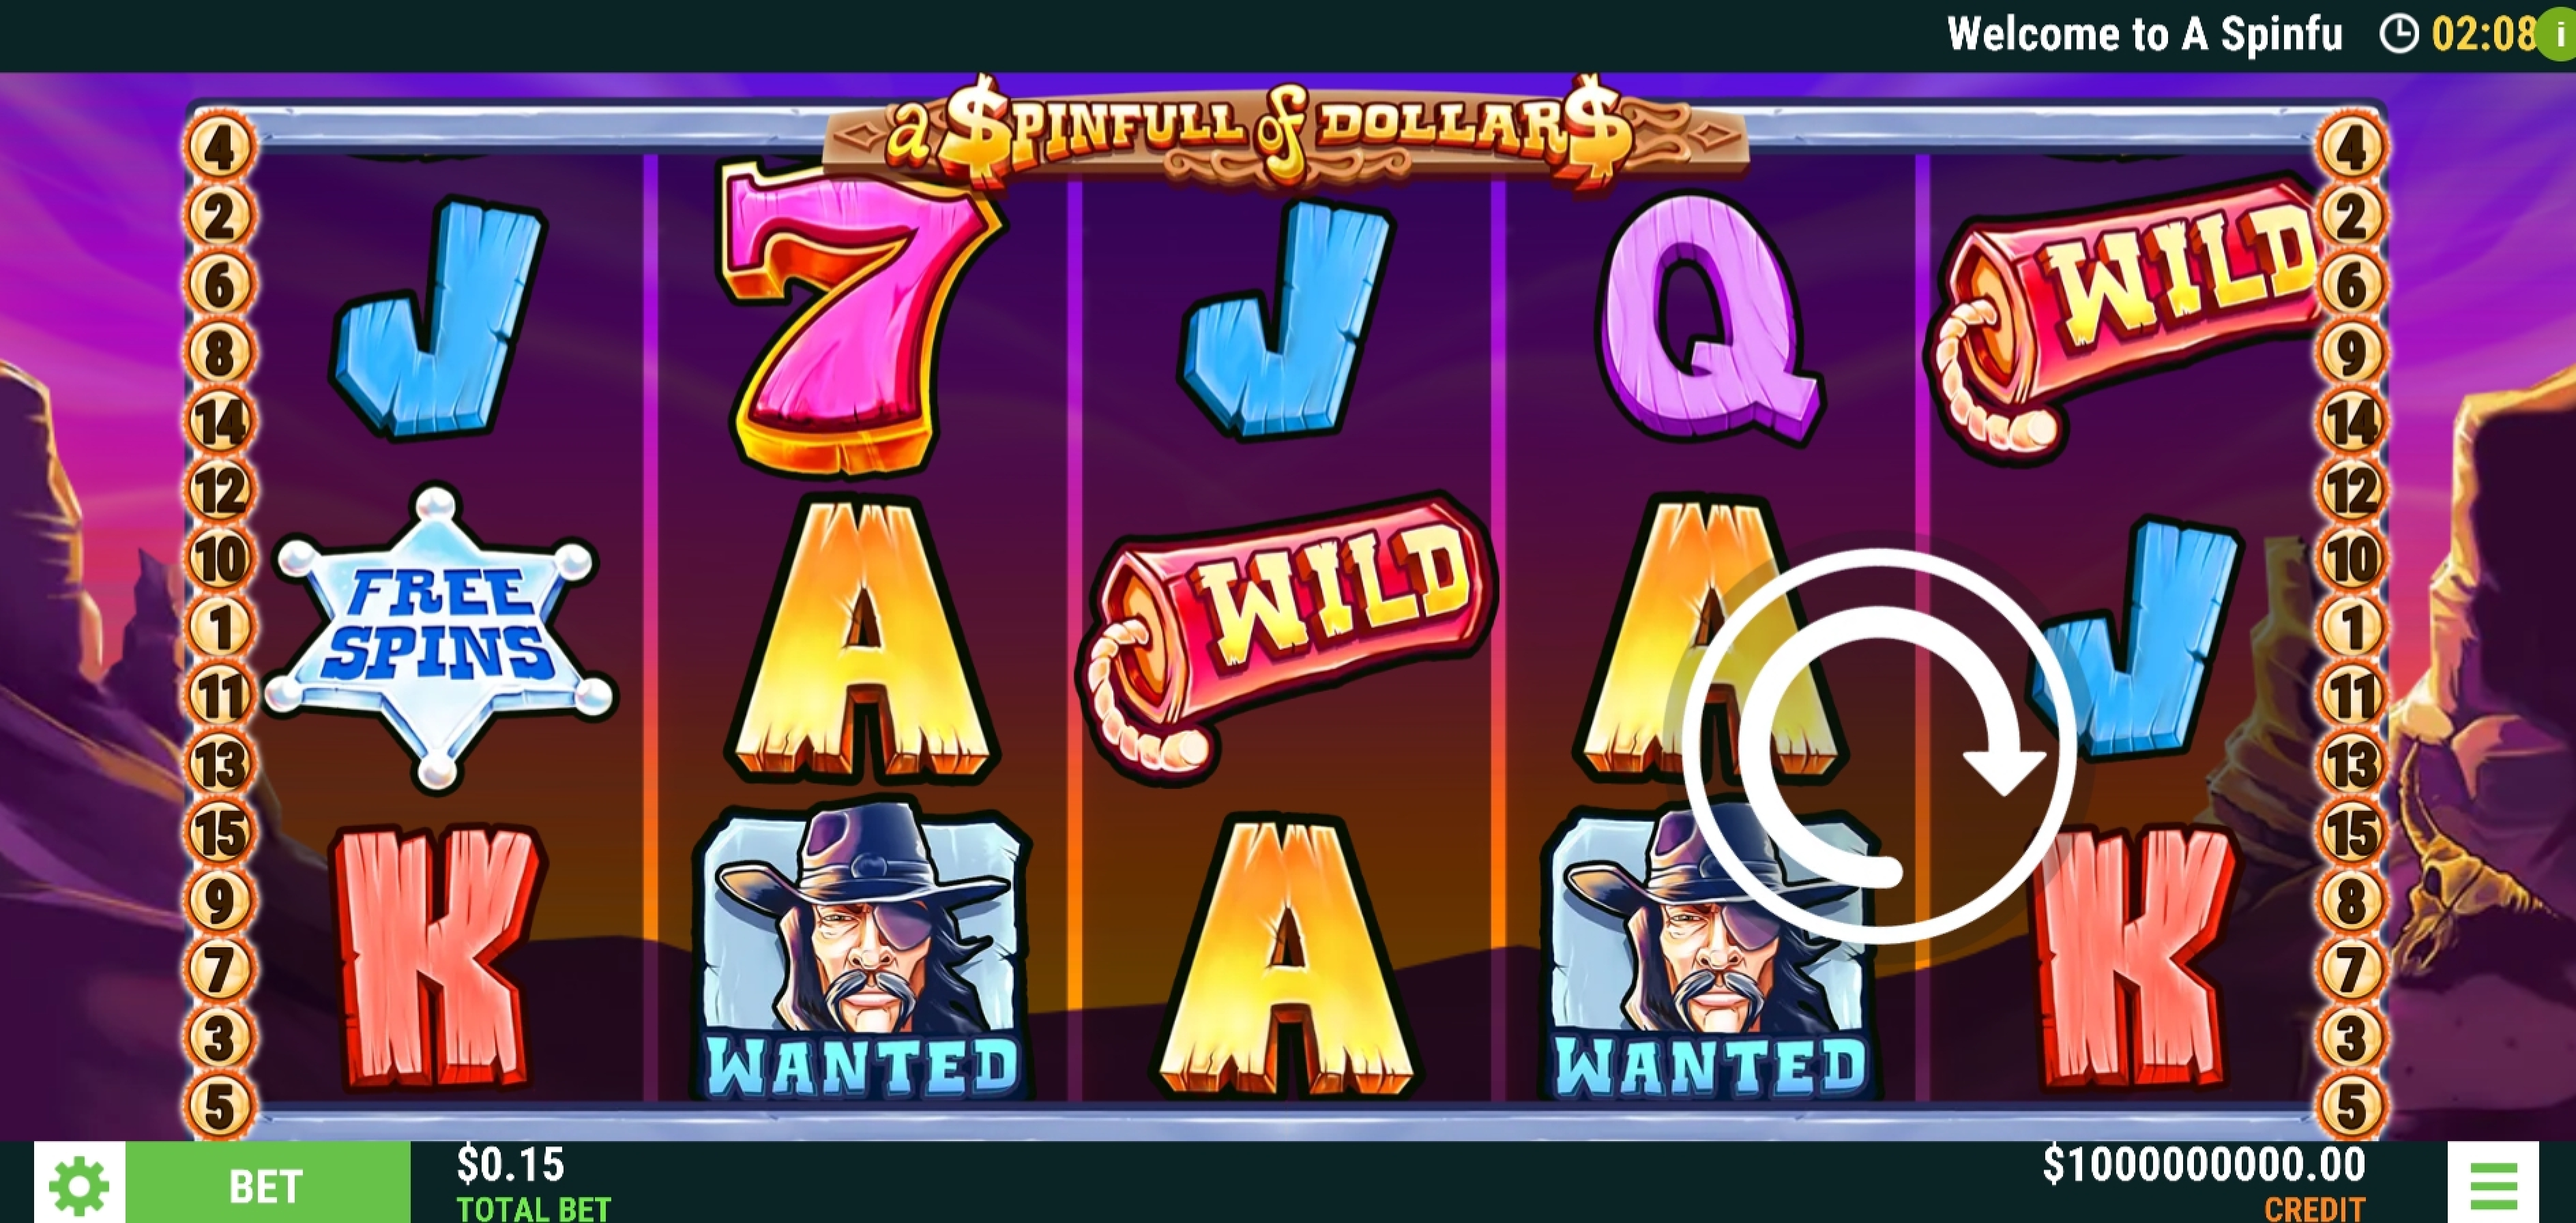 Reels in A Spinfull of Dollars Slot Game by Slot Factory